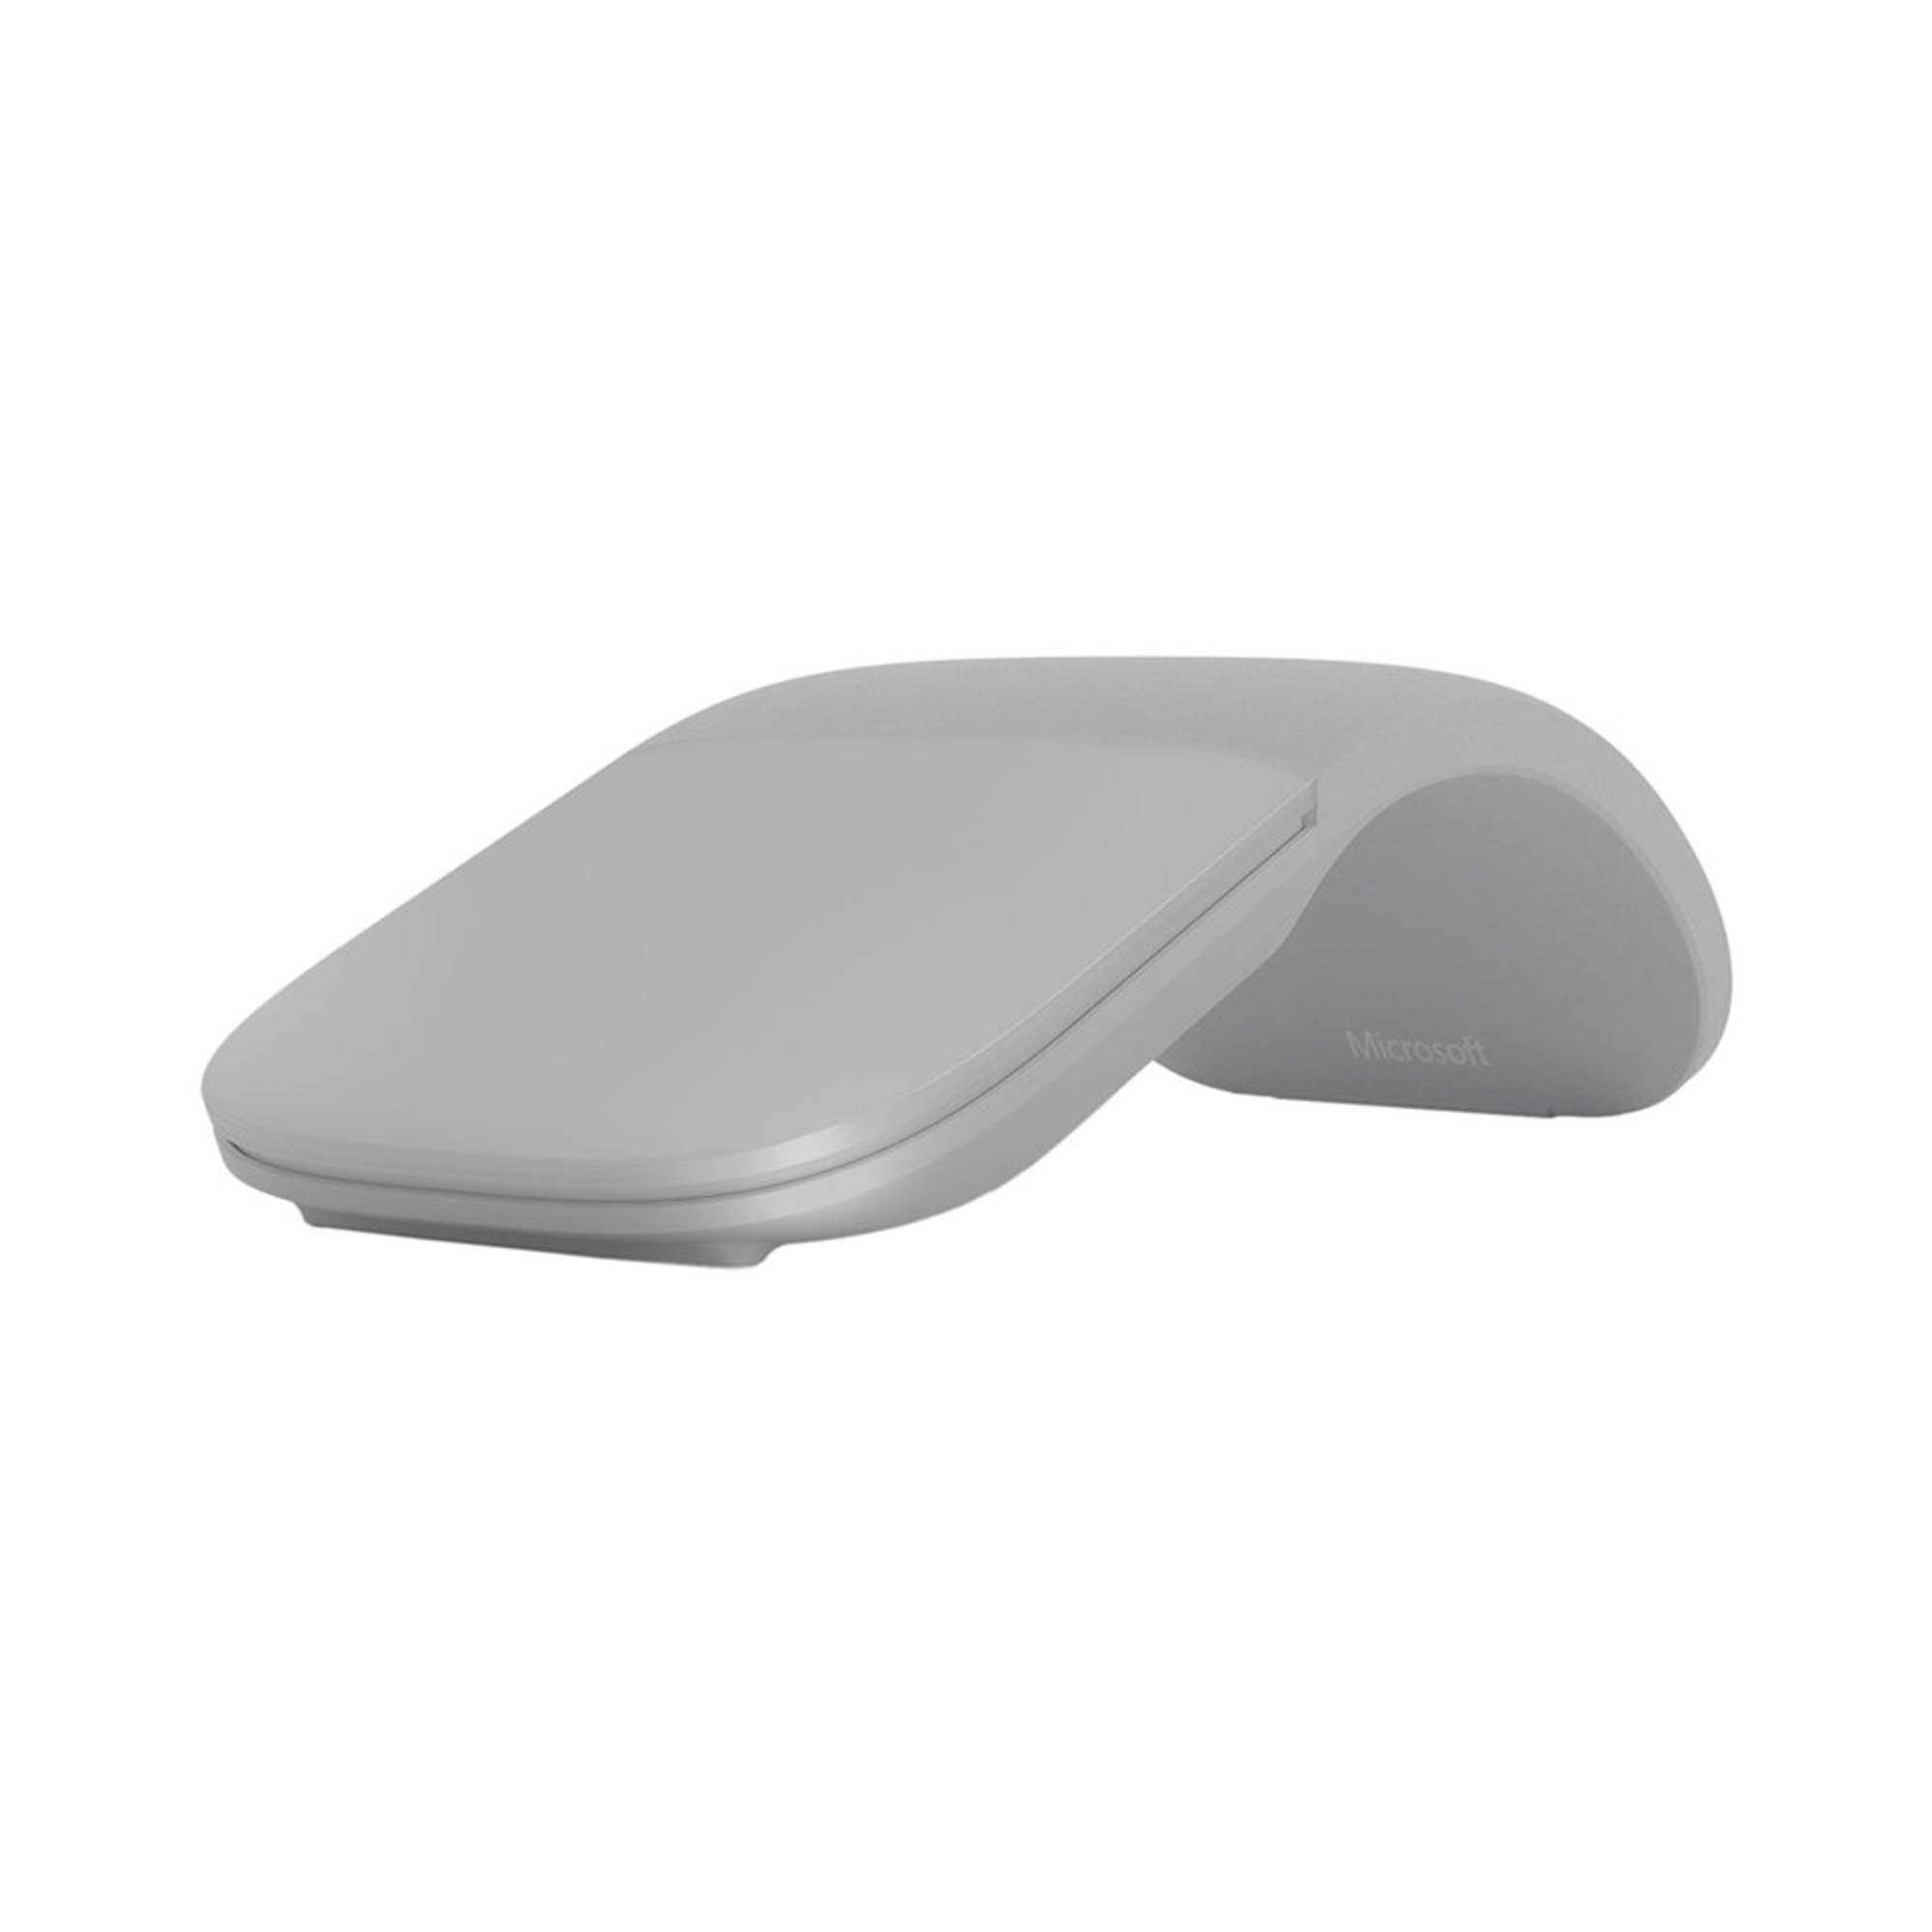 Microsoft Surface Arc Mouse Bluetooth Mouse - Light Gray | Mice